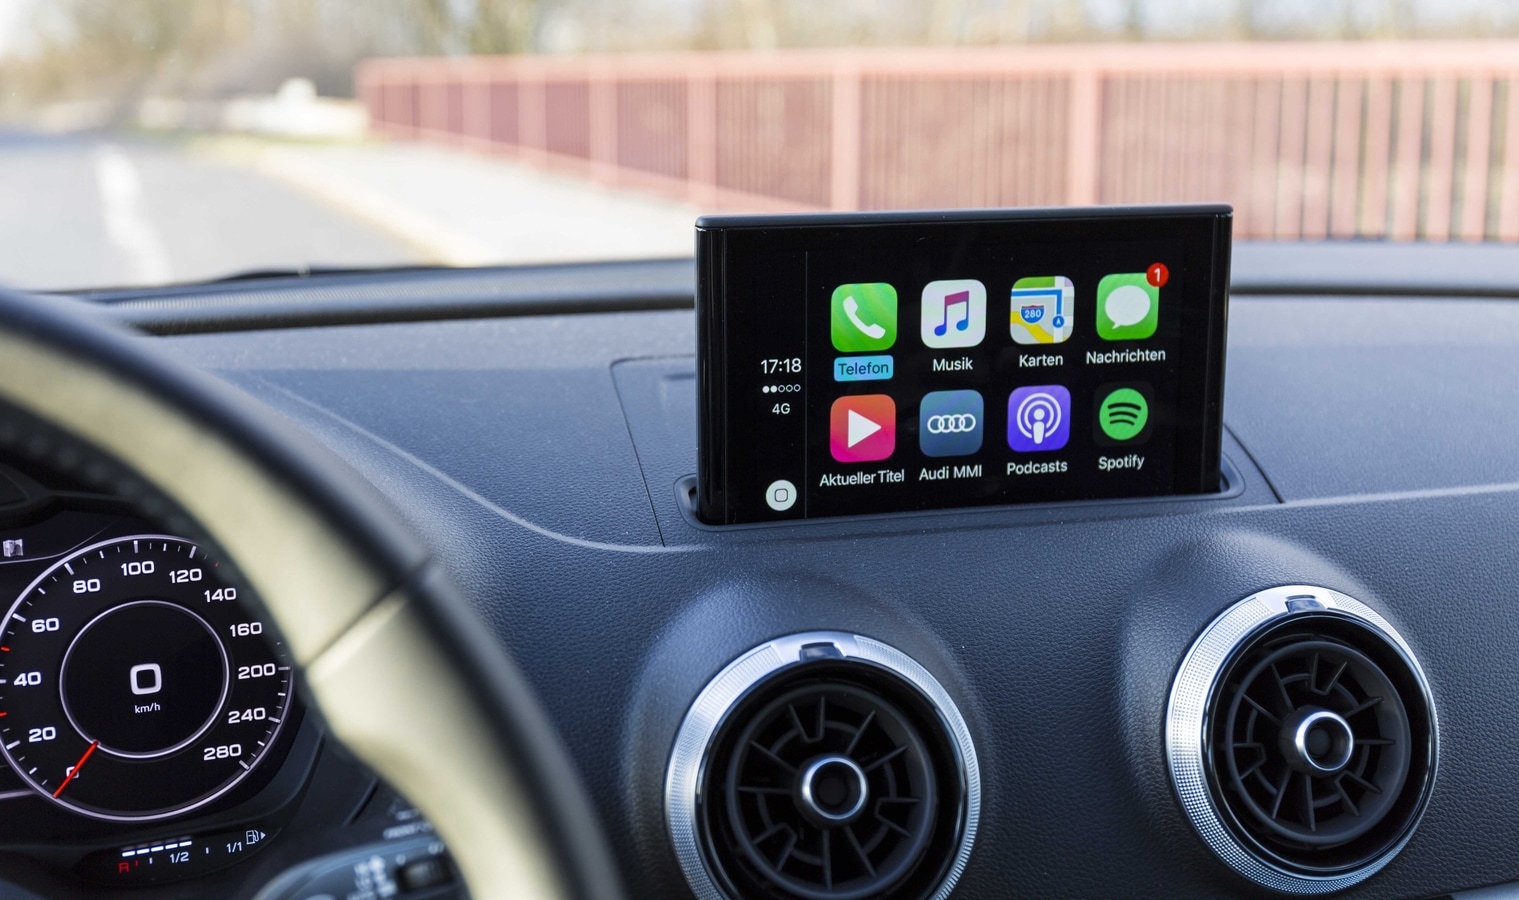 Every Car Has a Giant Touch Screen Now